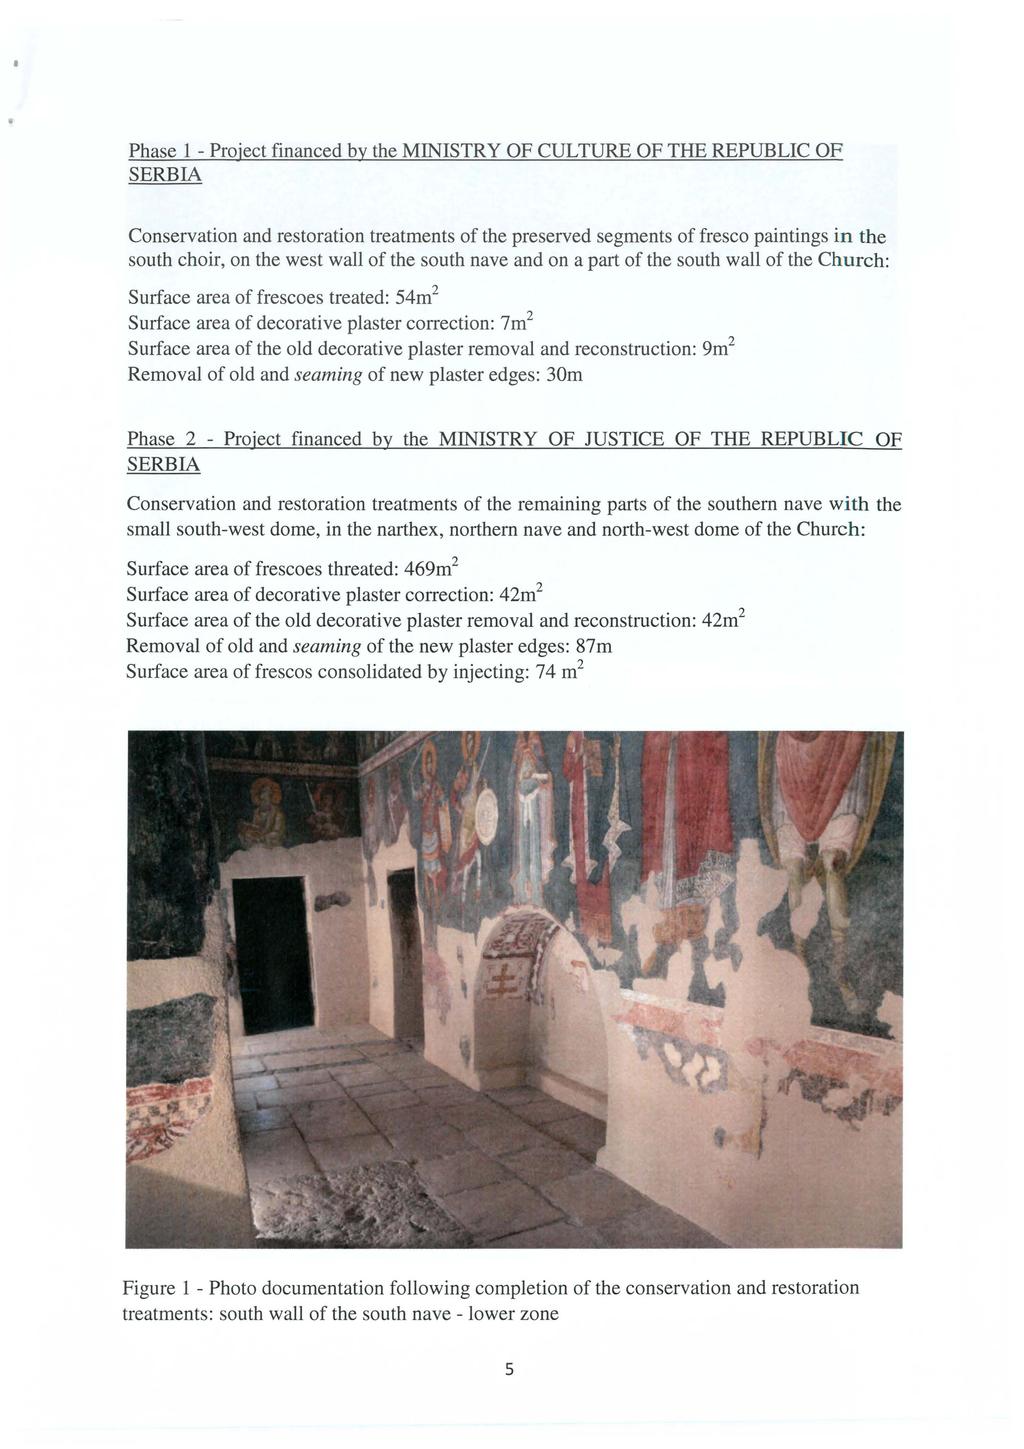 Phase 1 -Project financed by the MINISTRY OF CULTURE OF THE REPUBLIC OF SERBIA Conservation and restoration treatments of the preserved segments of fresco paintings in the south choir, on the west